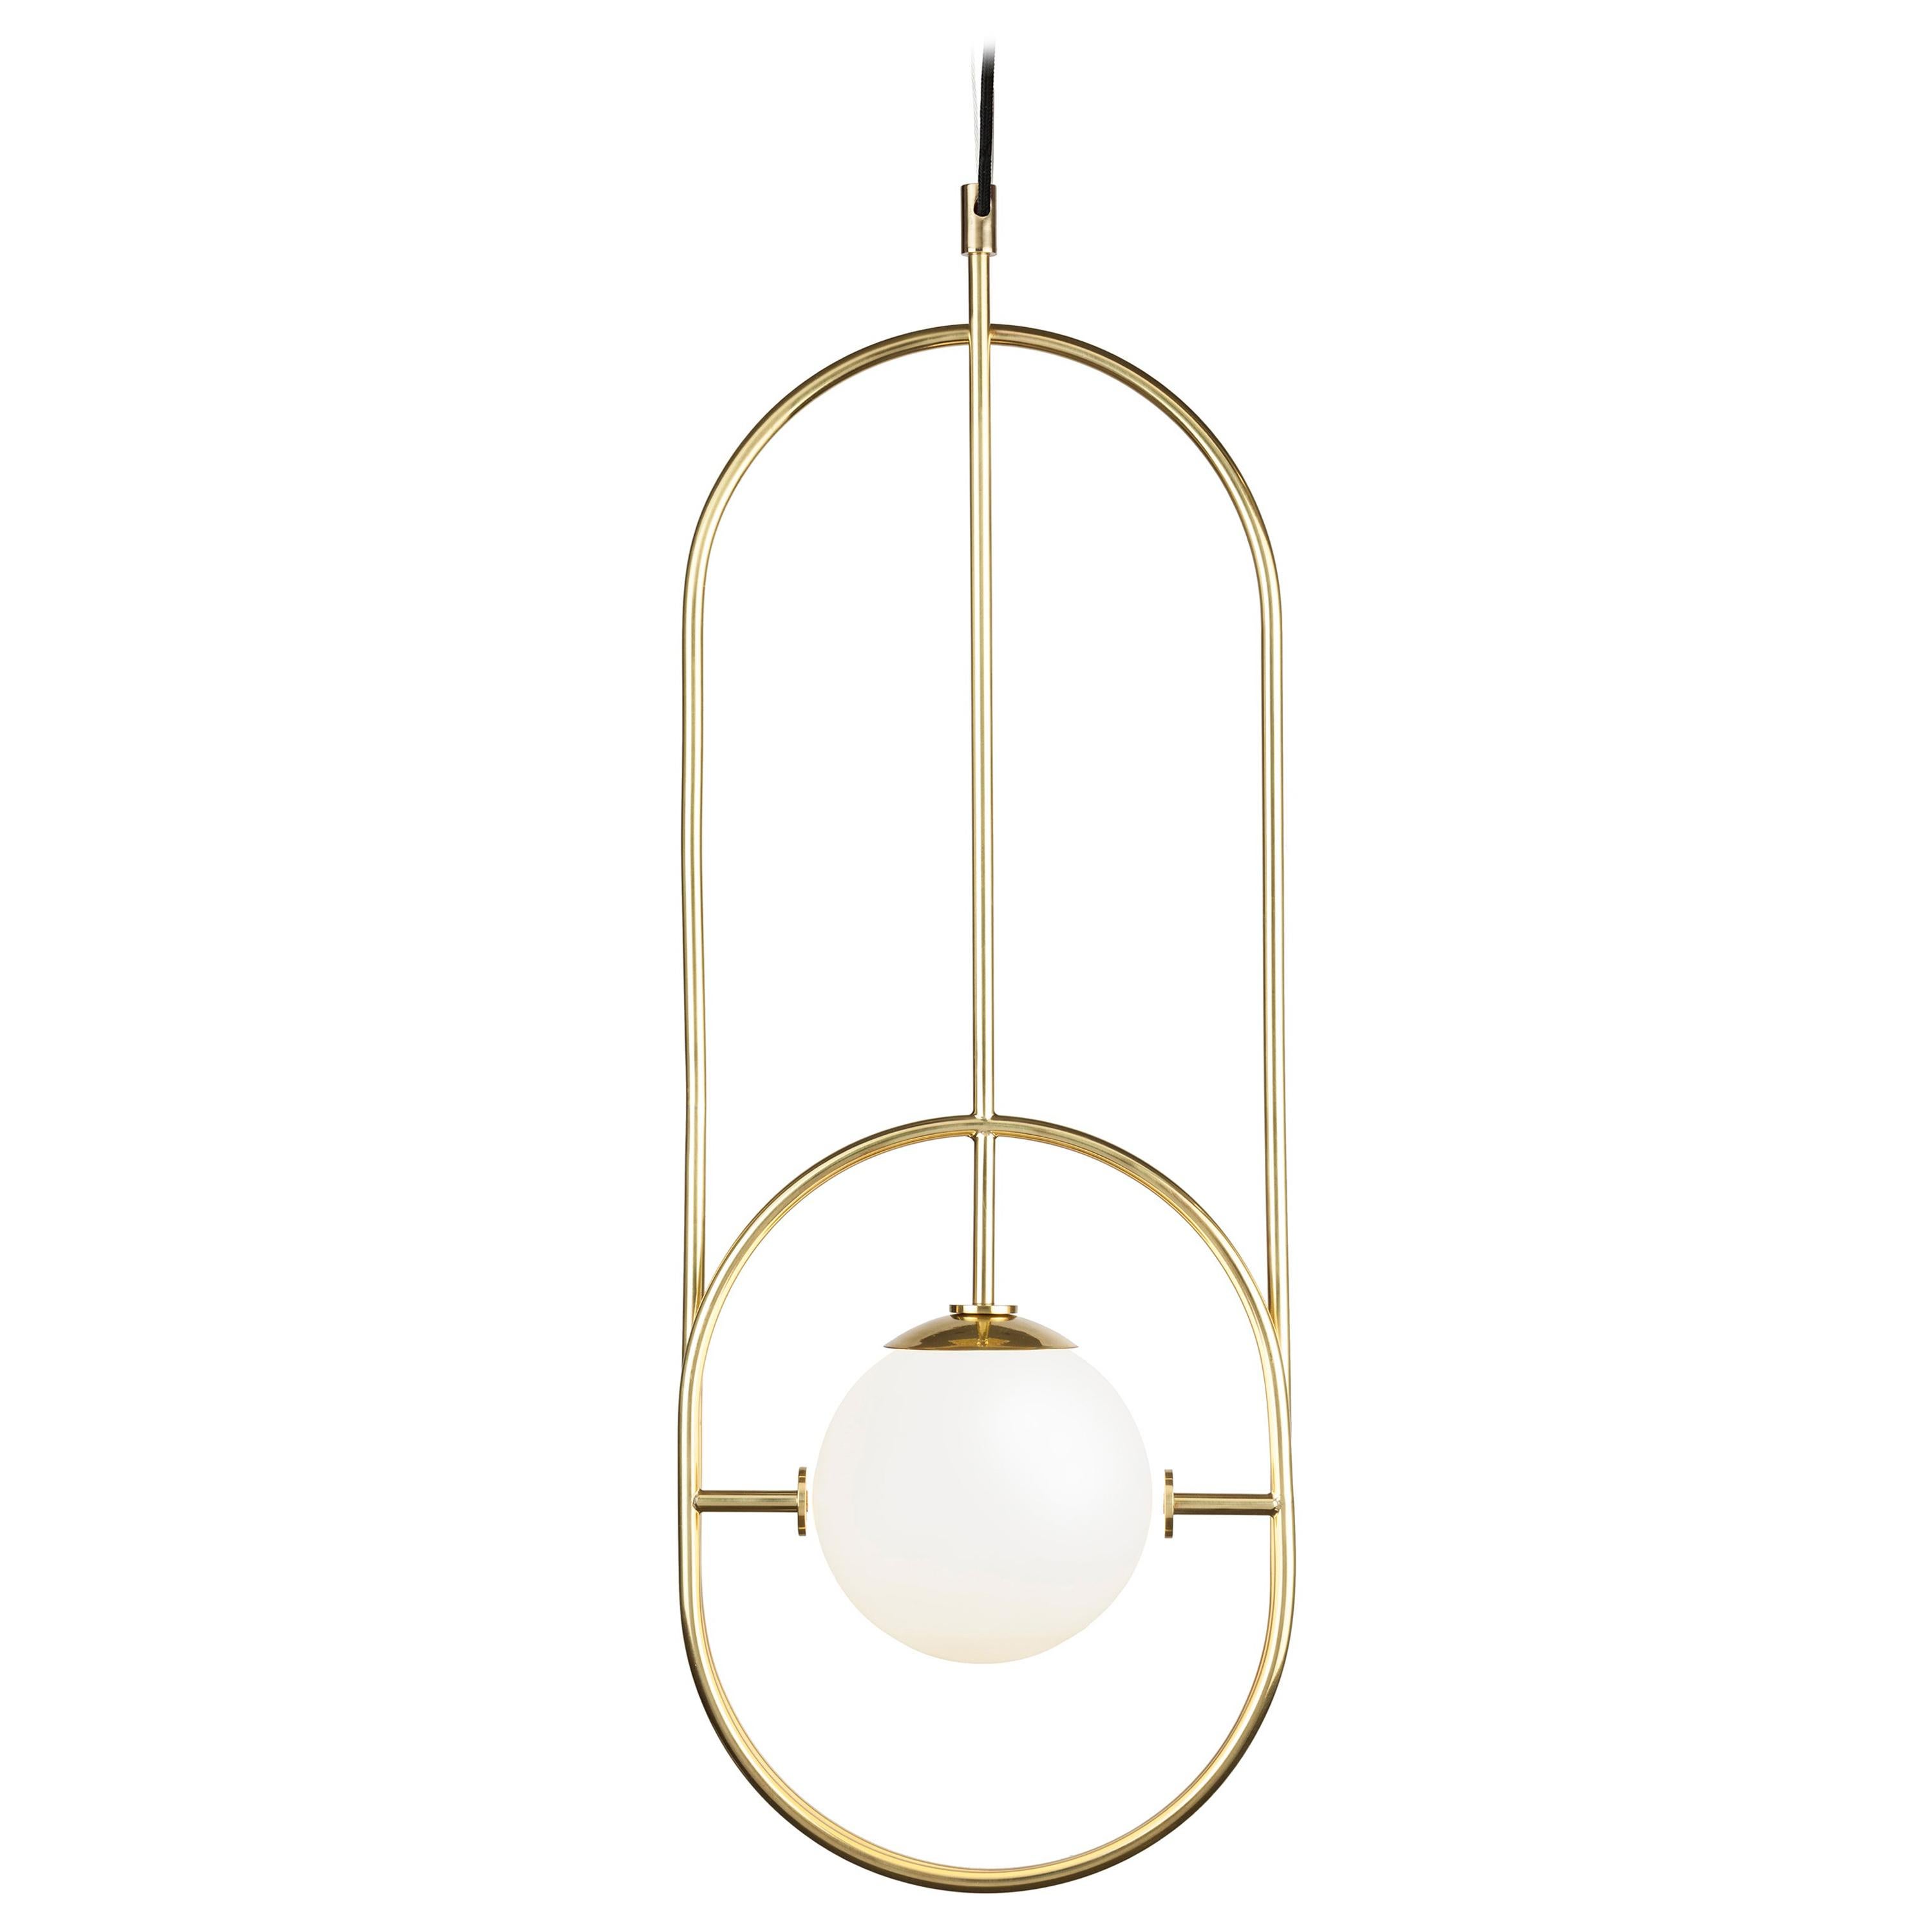 Art Deco inspired Loop I Pendant Lamp in Polished Brass Frosted Glass Handmade